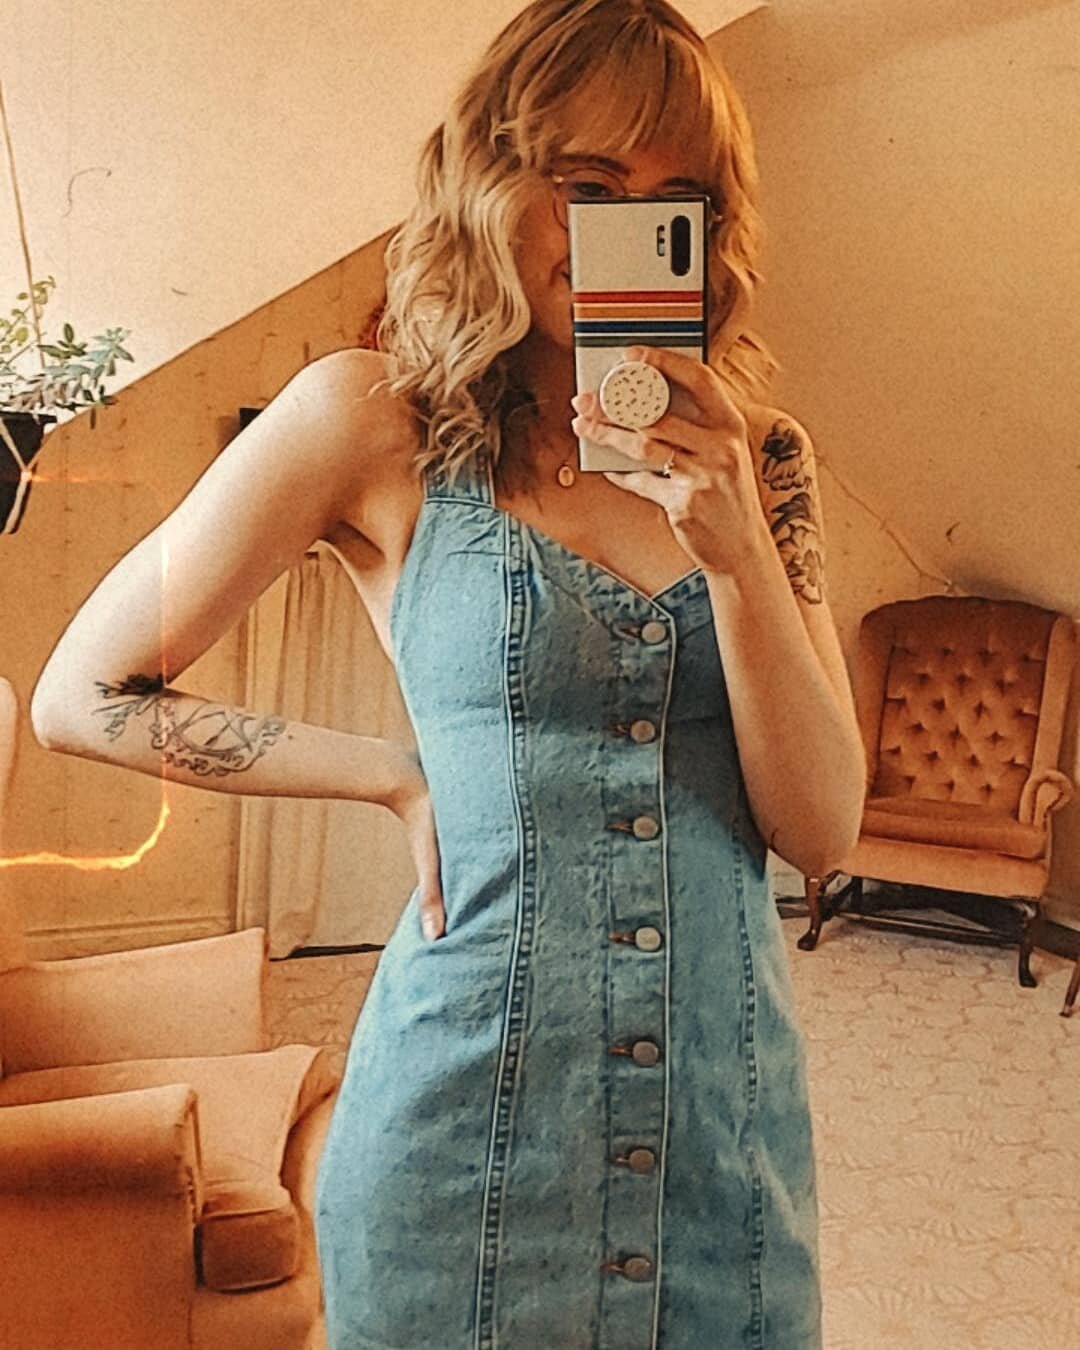 I post more on @taylornicoleportraits than I do here. Sorry I'll try to do better here 🤪
_
#selfie #mirrorpic #galaxynote10plus #thriftedfashion #denimdress